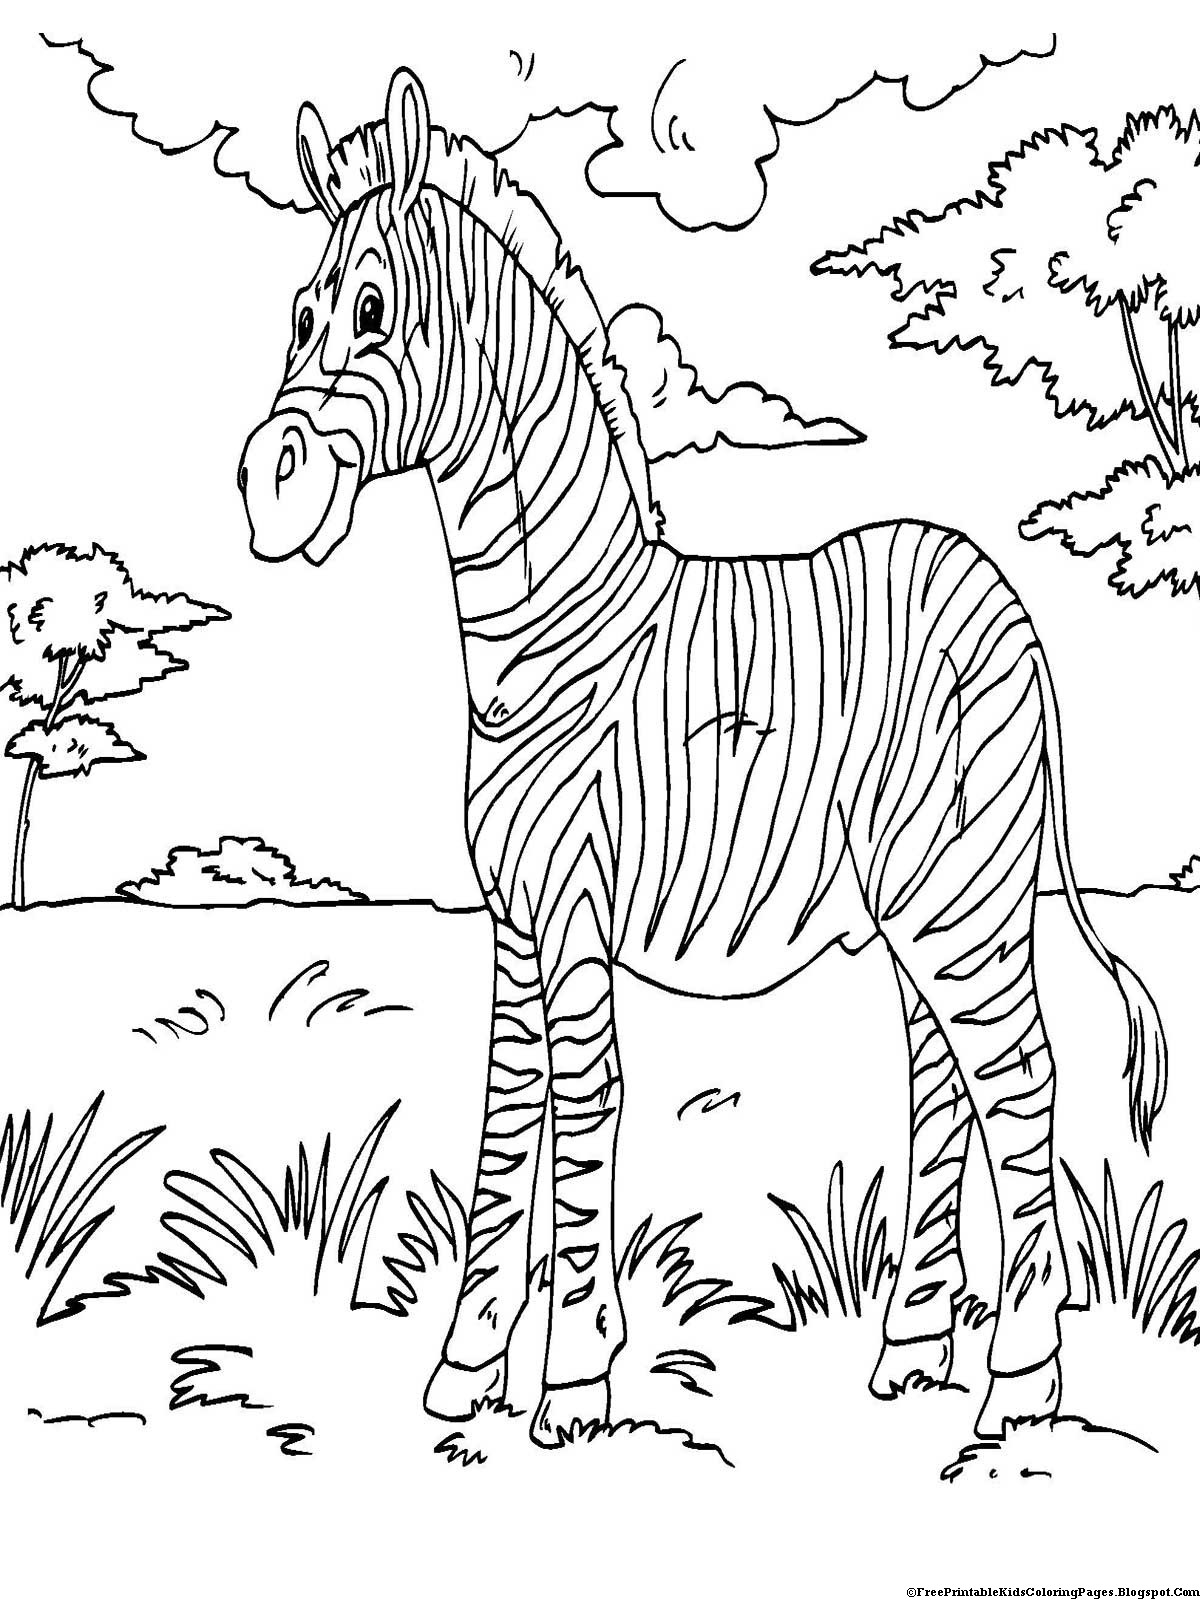 Toddler Coloring Pages Printable
 Zebra Coloring Pages Free Printable Kids Coloring Pages